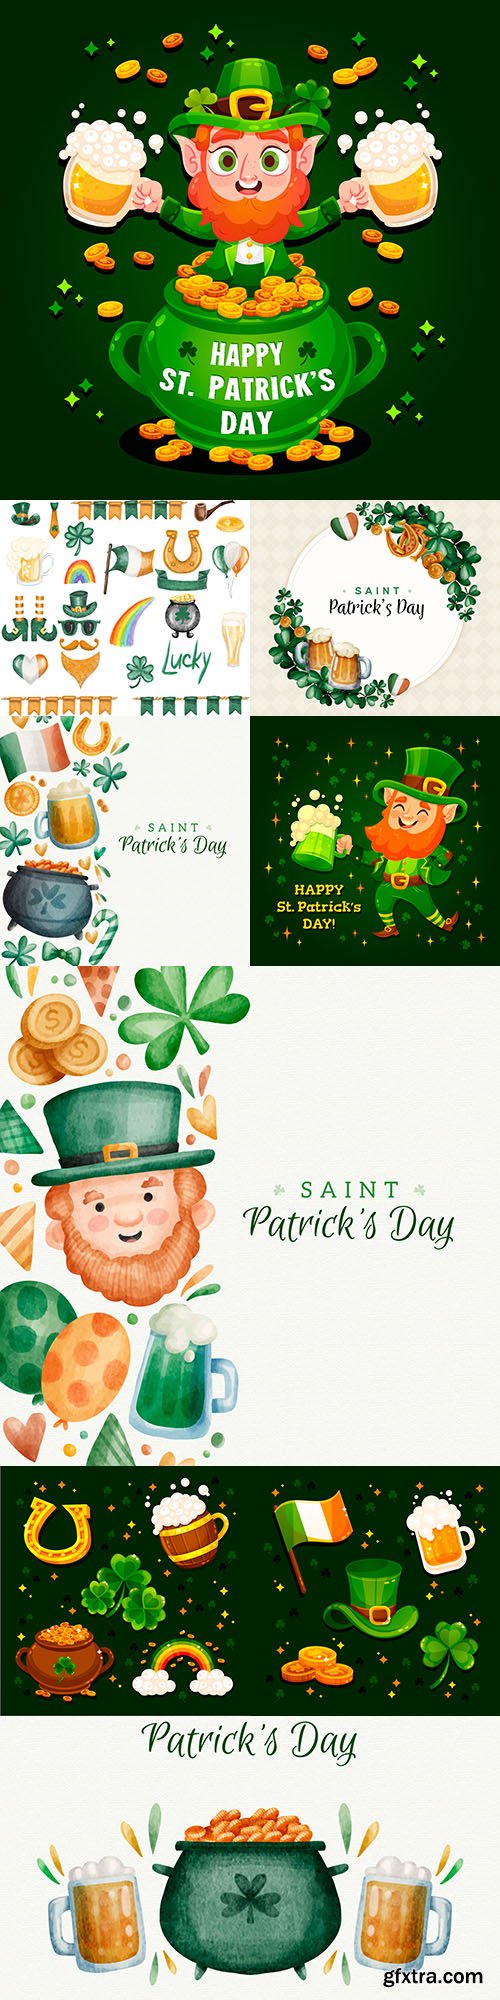 St. Patrick\'s Day party design vector illustrations 4